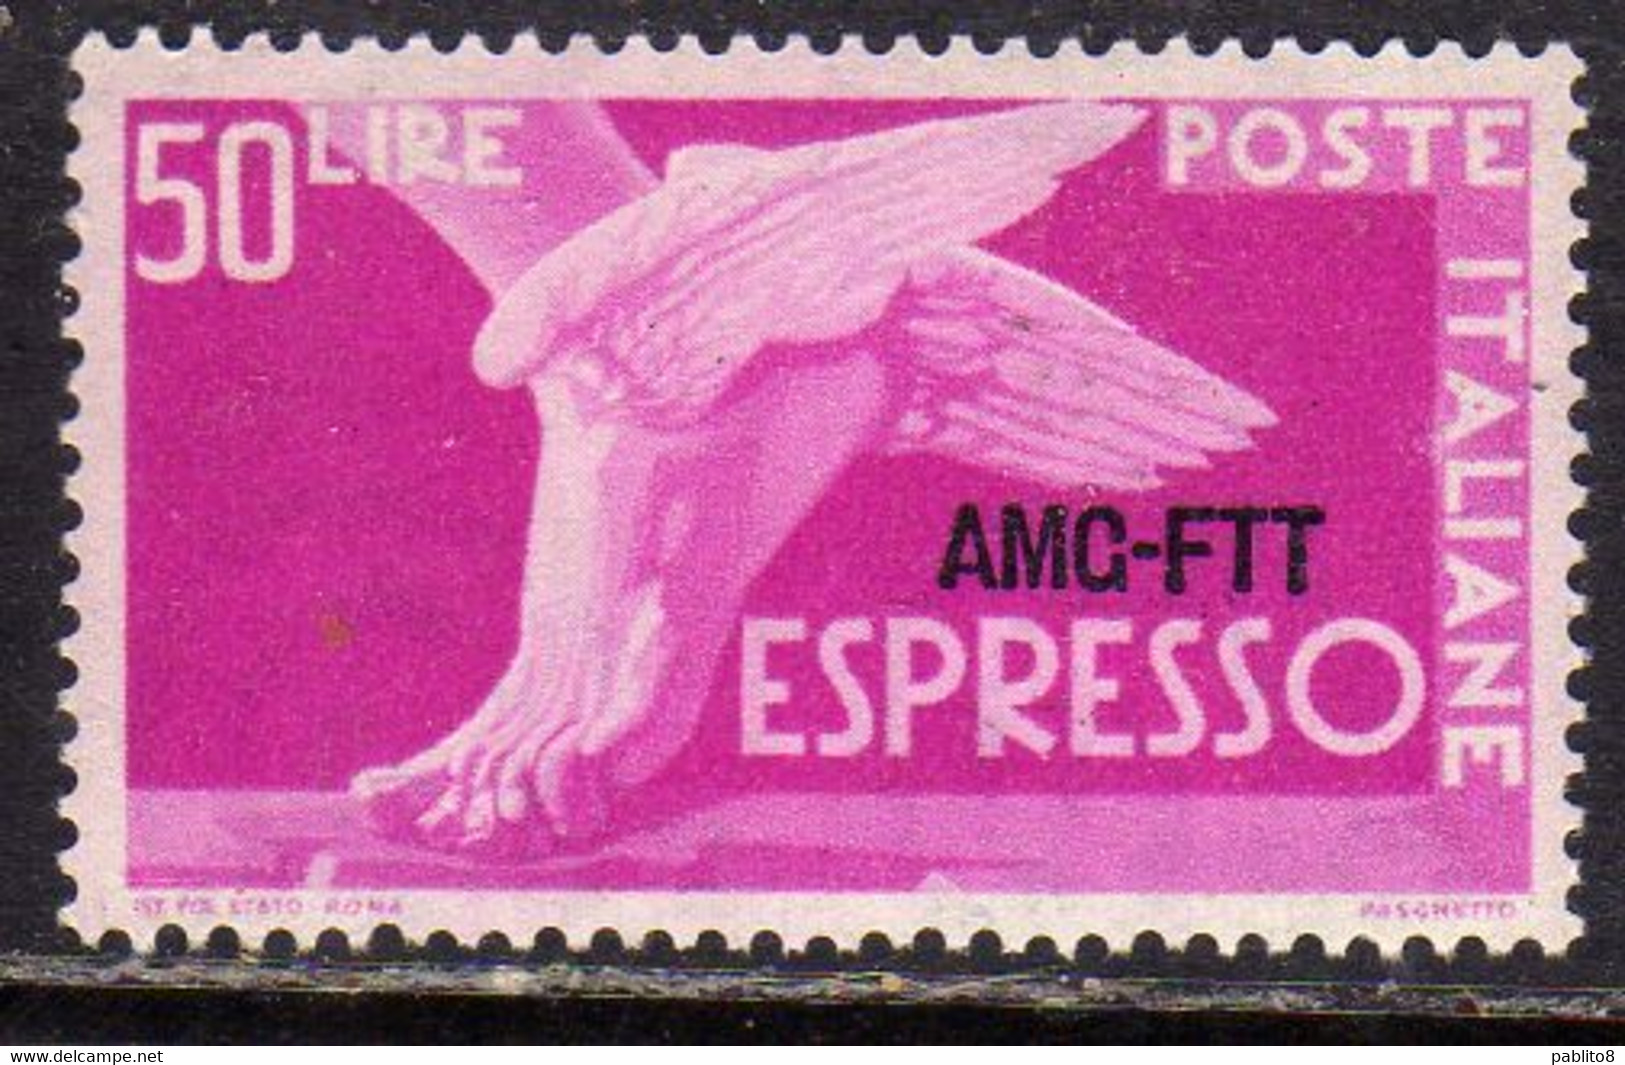 TRIESTE A 1953 AMG-FTT OVERPRINTED ESPRESSO SPECIAL DELIVERY LIRE 50 RUOTA III MNH BEN CENTRATO - Exprespost